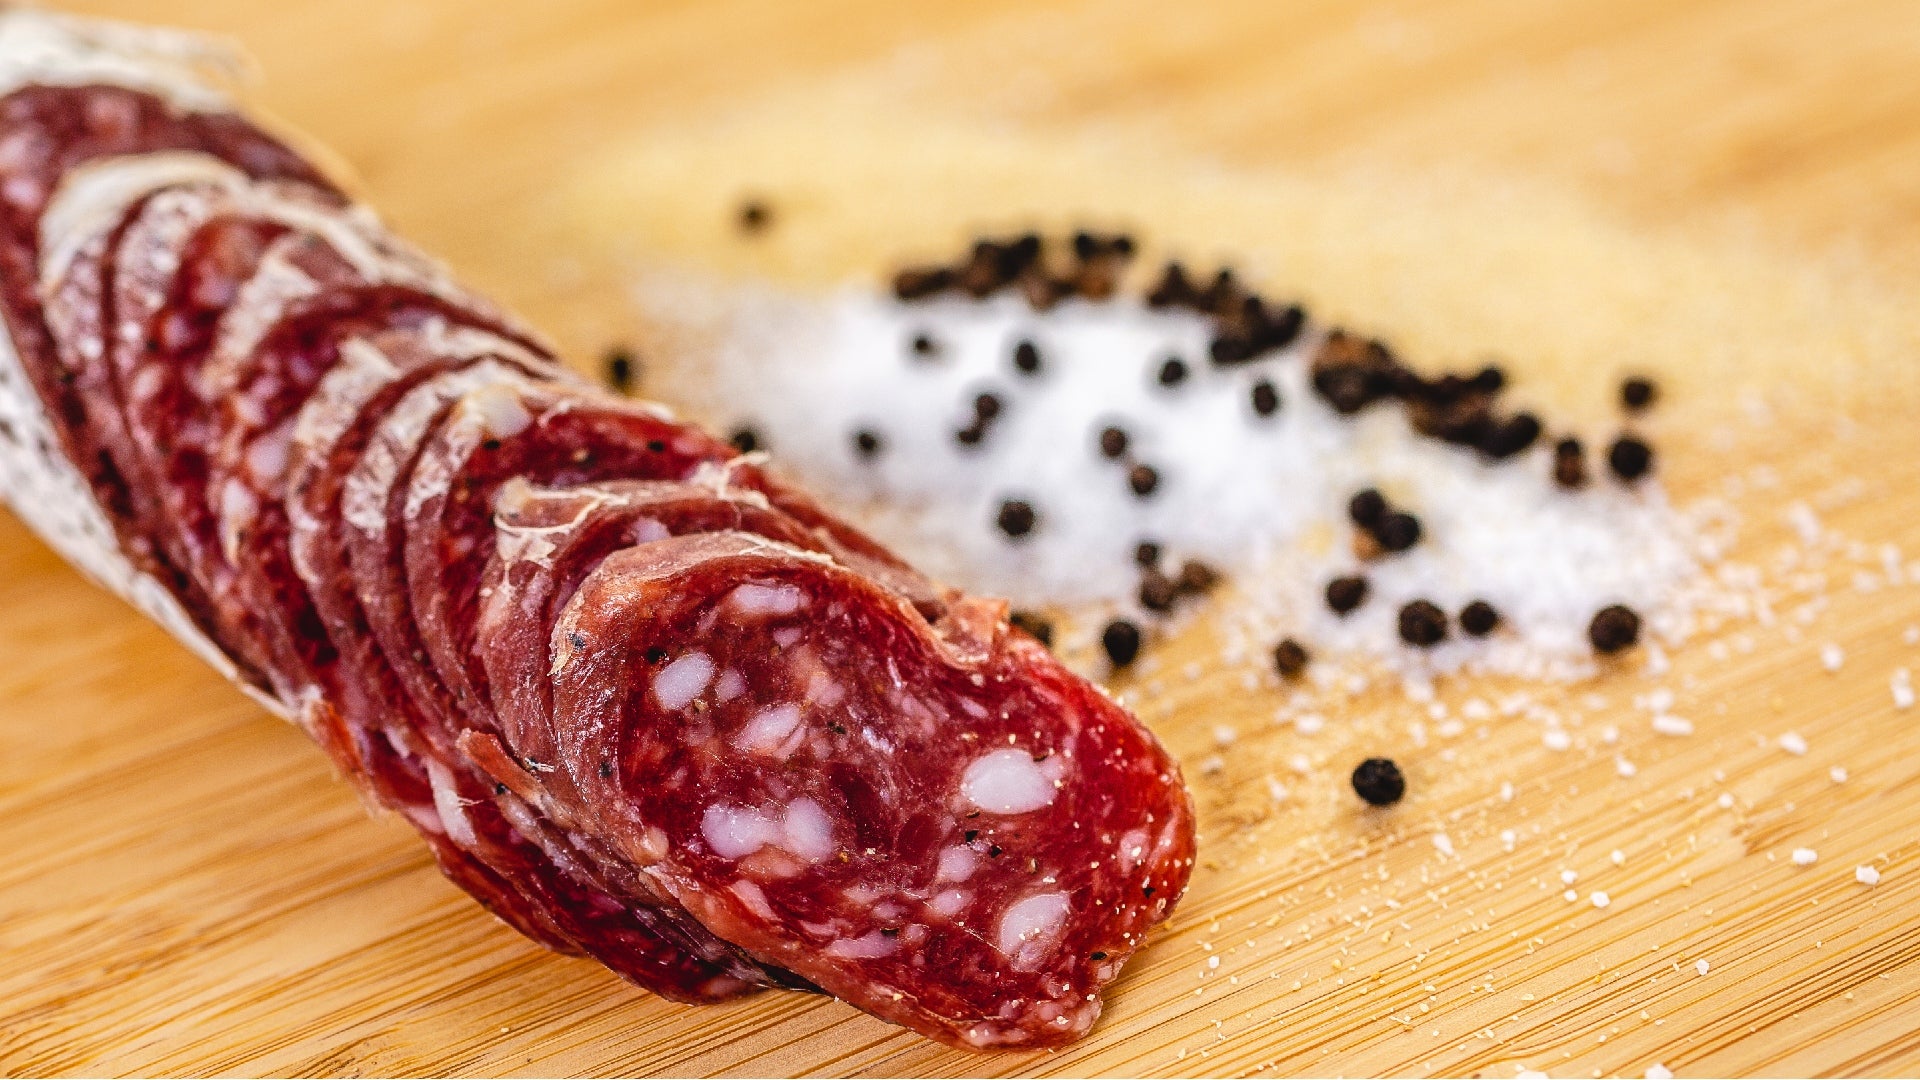 A close up of slices of Saucisson Sec salami on a cutting board with salt and pepper piled on the cutting board in the background.